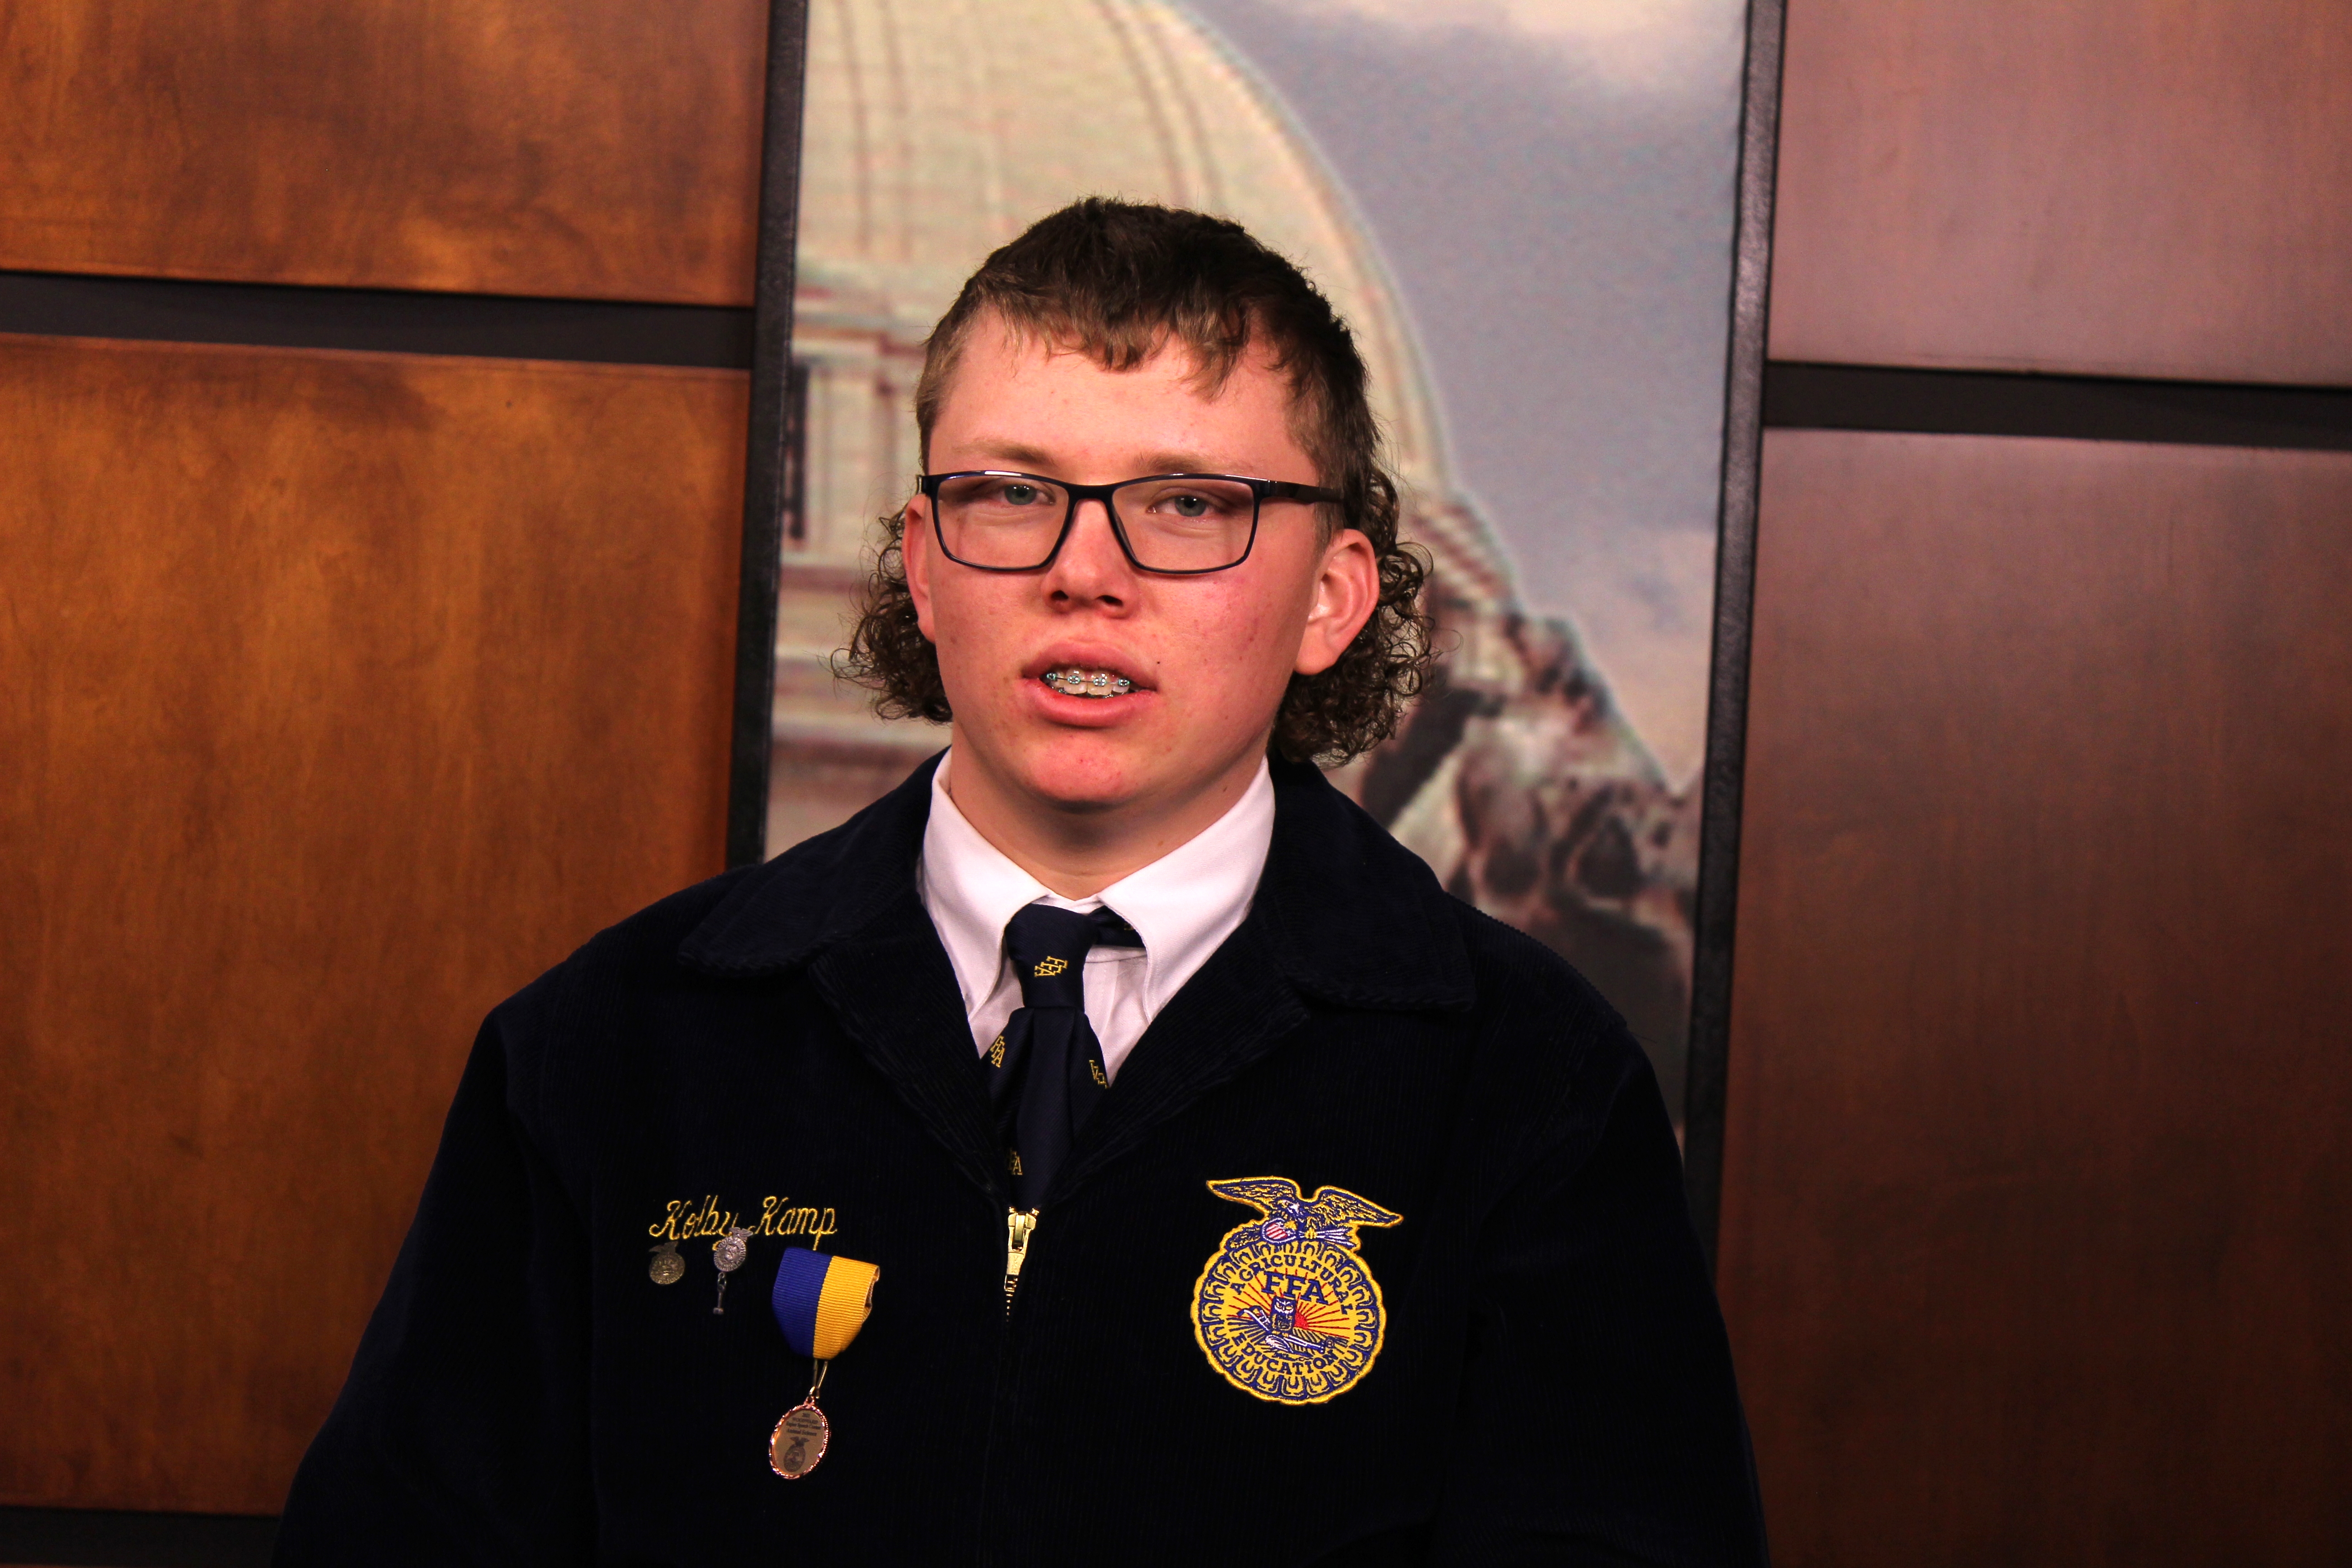 Introducing Kolby Kamp of the Laverne FFA Chapter, Your 2022 Northwest Area Star in Agricultural Production